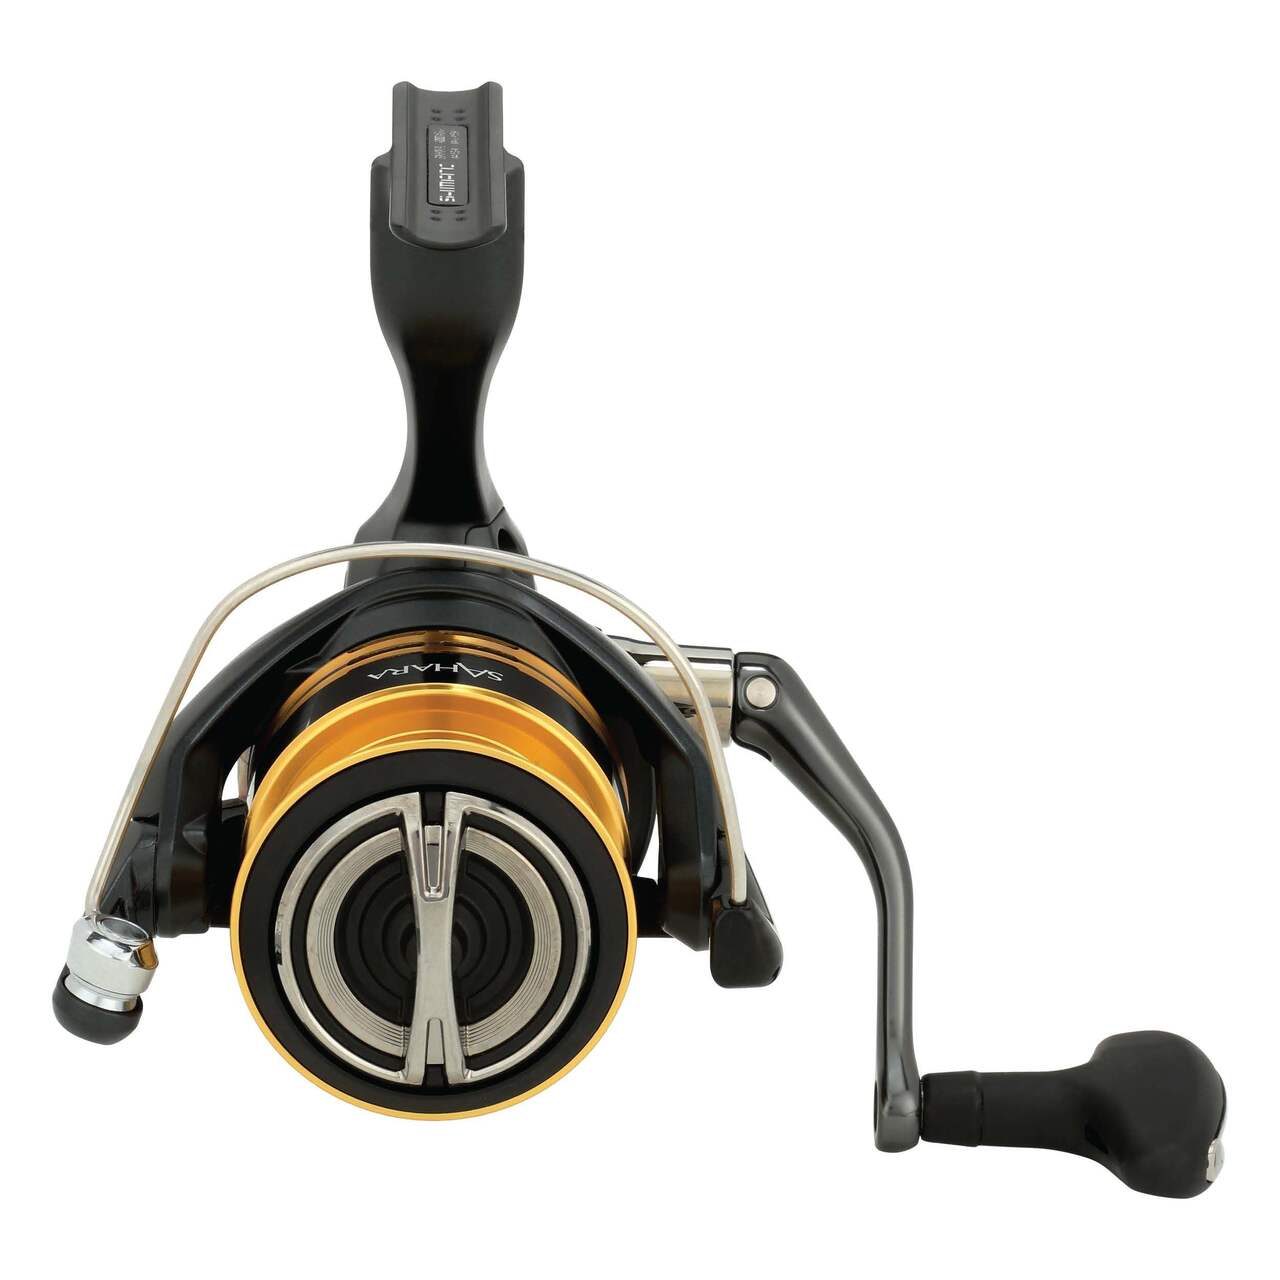 https://media-www.canadiantire.ca/product/playing/fishing/fishing-equipment/0775445/shimano-sahara-spinning-reel-size-4000-47fce03f-9d33-4939-881d-3987e8e8600c-jpgrendition.jpg?imdensity=1&imwidth=640&impolicy=mZoom